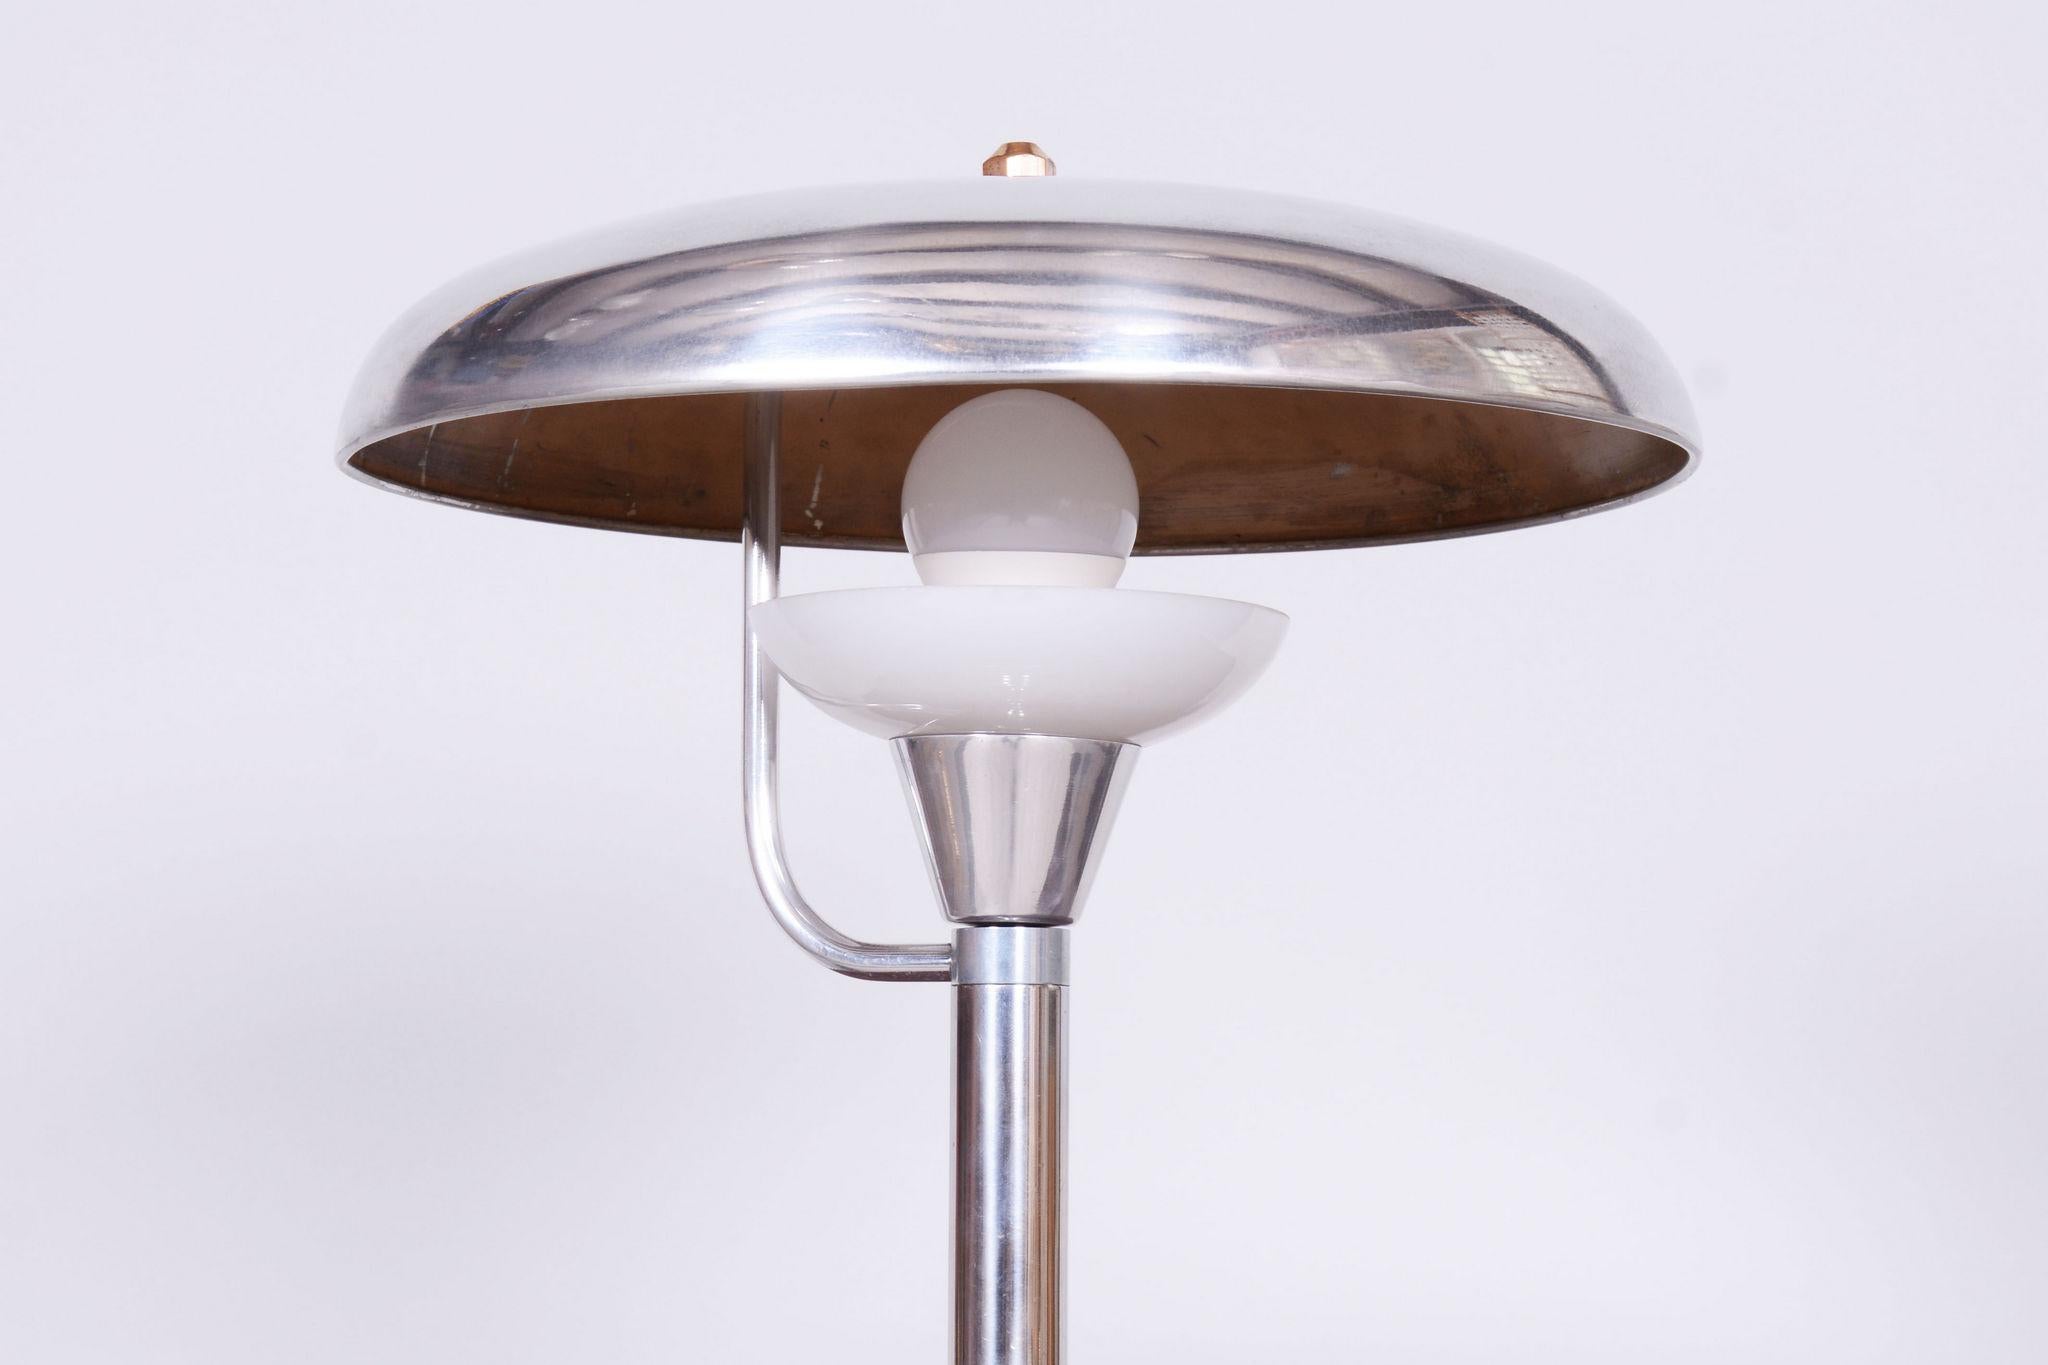 Restored Bauhaus Table Lamp, by Franta Anýž, Nickle-Plated Steel, Czech, 1920s For Sale 2